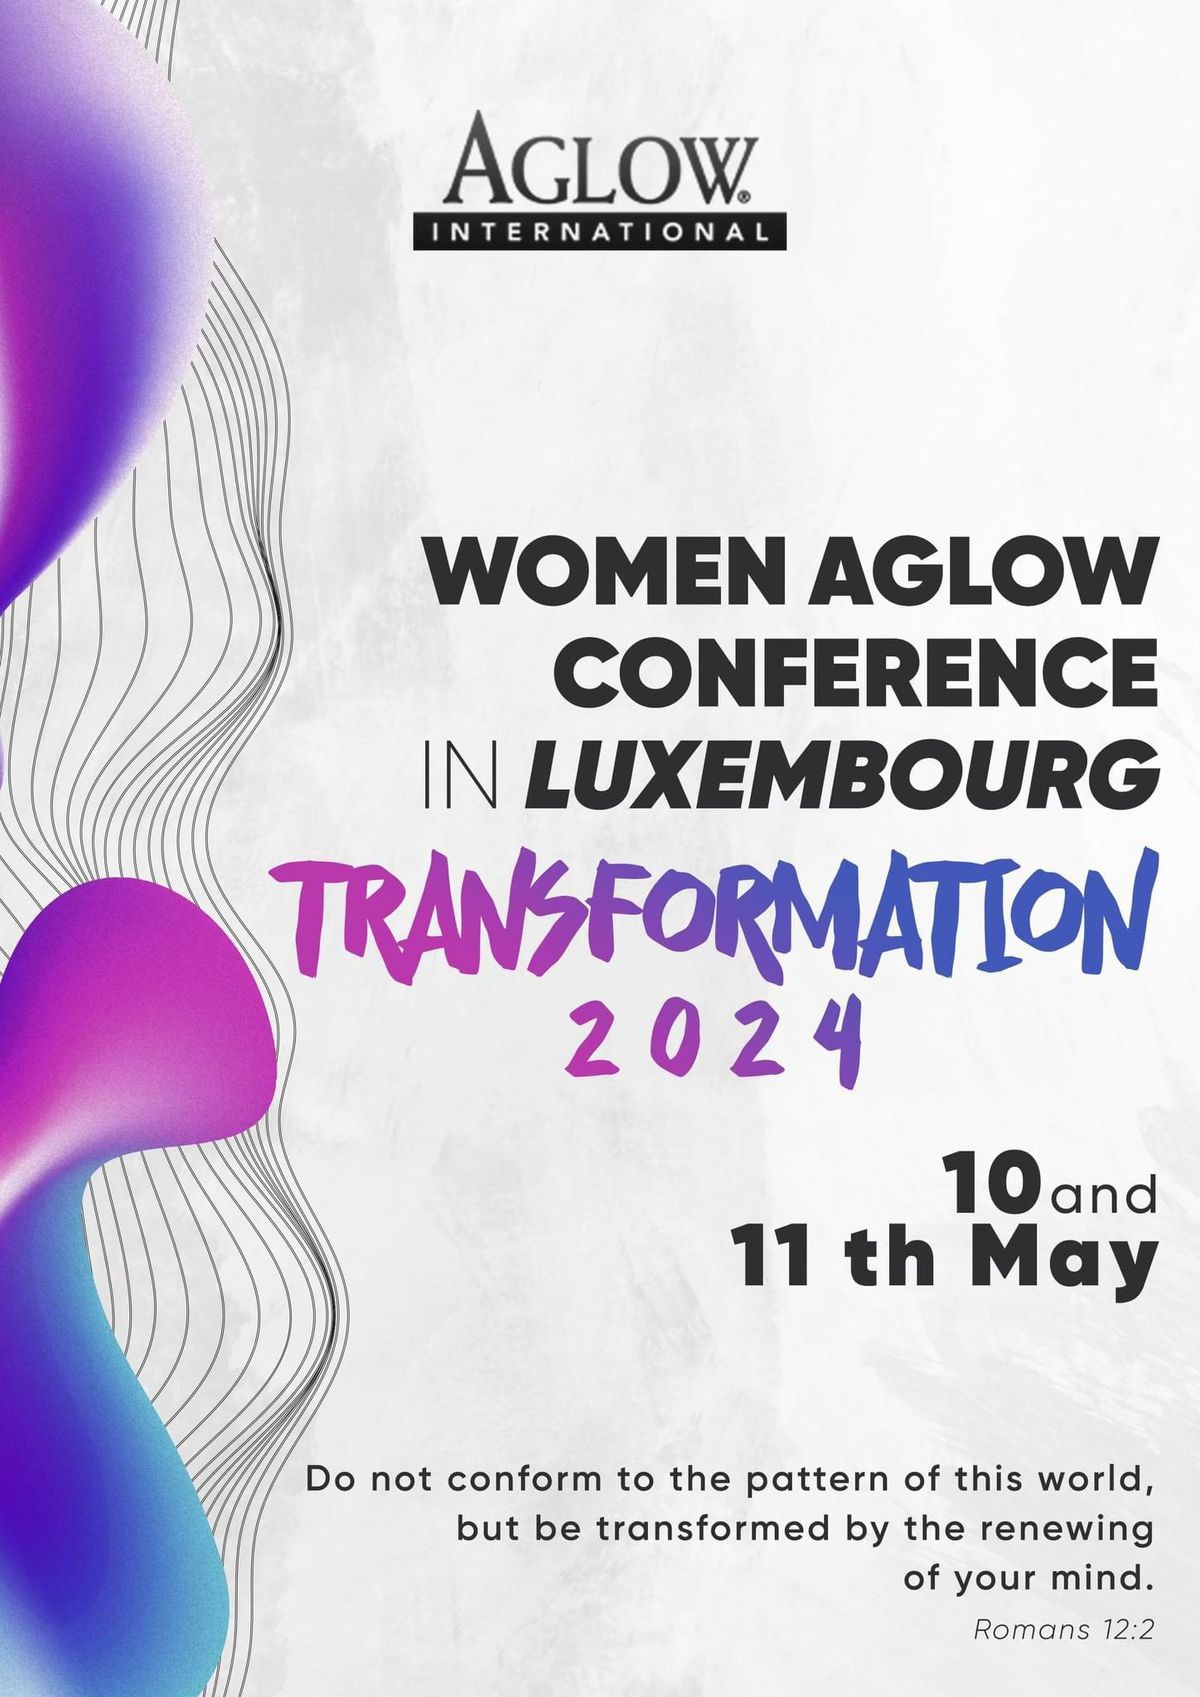 Women Aglow conference in Luxembourg 